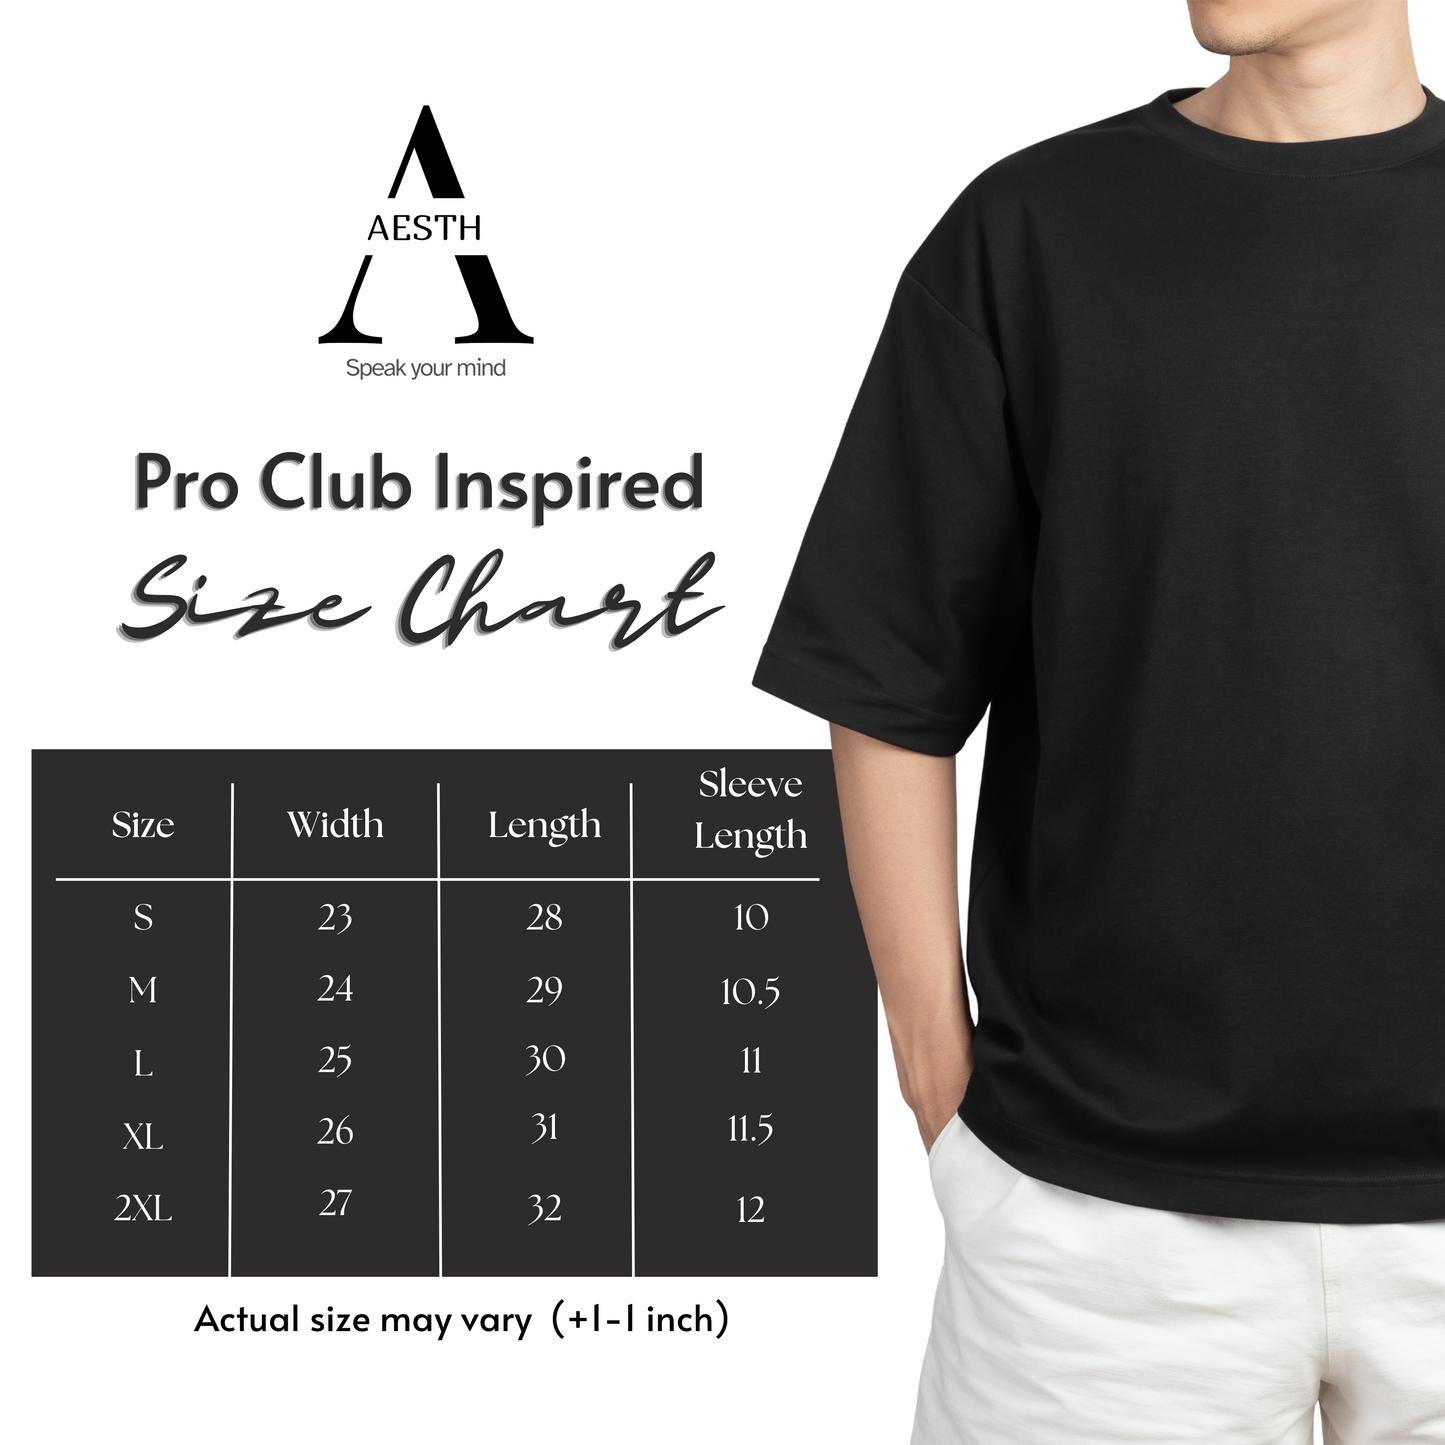 Passion Glamour Pro Club Tee